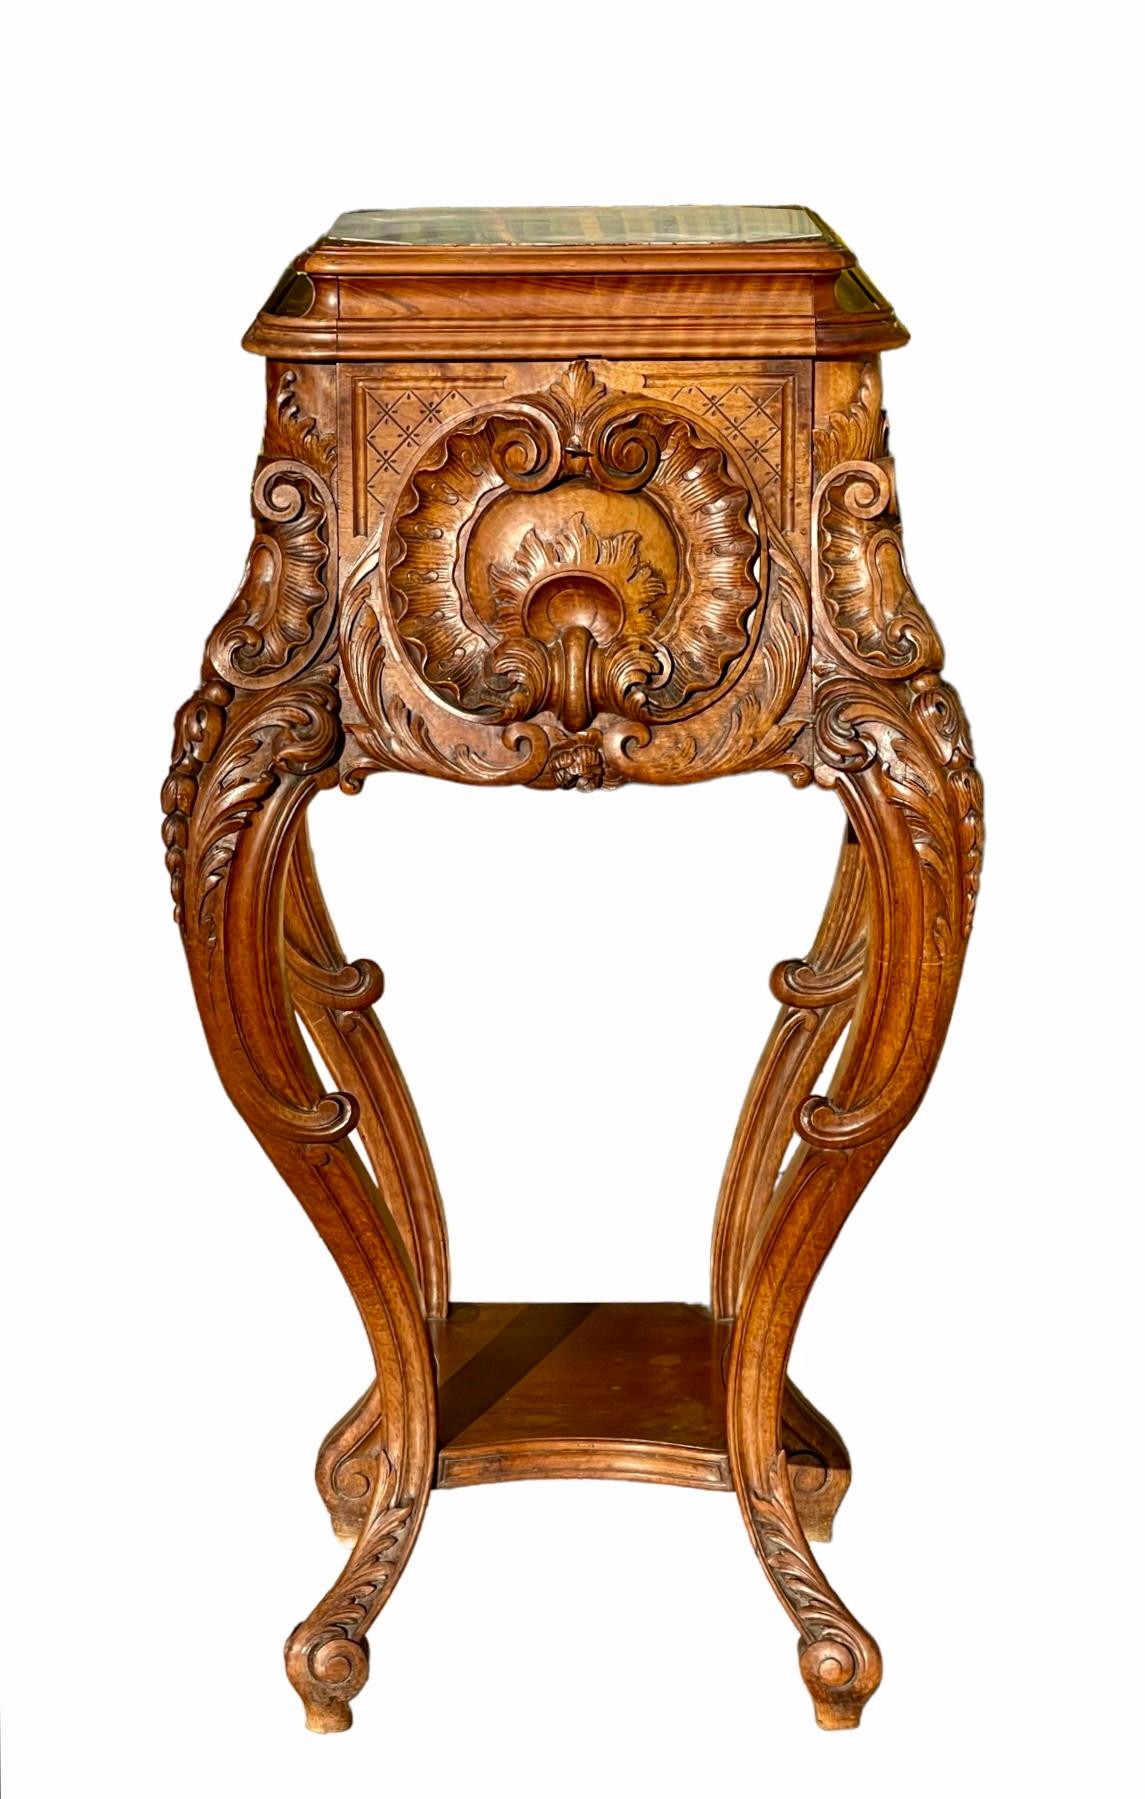 Superb carved walnut sheath in Louis XV rocaille style. White marble top, small front door with marble interior and shelf connecting the 4 legs. Very beautiful piece to present your most beautiful sculptures. French work from the 19th century of